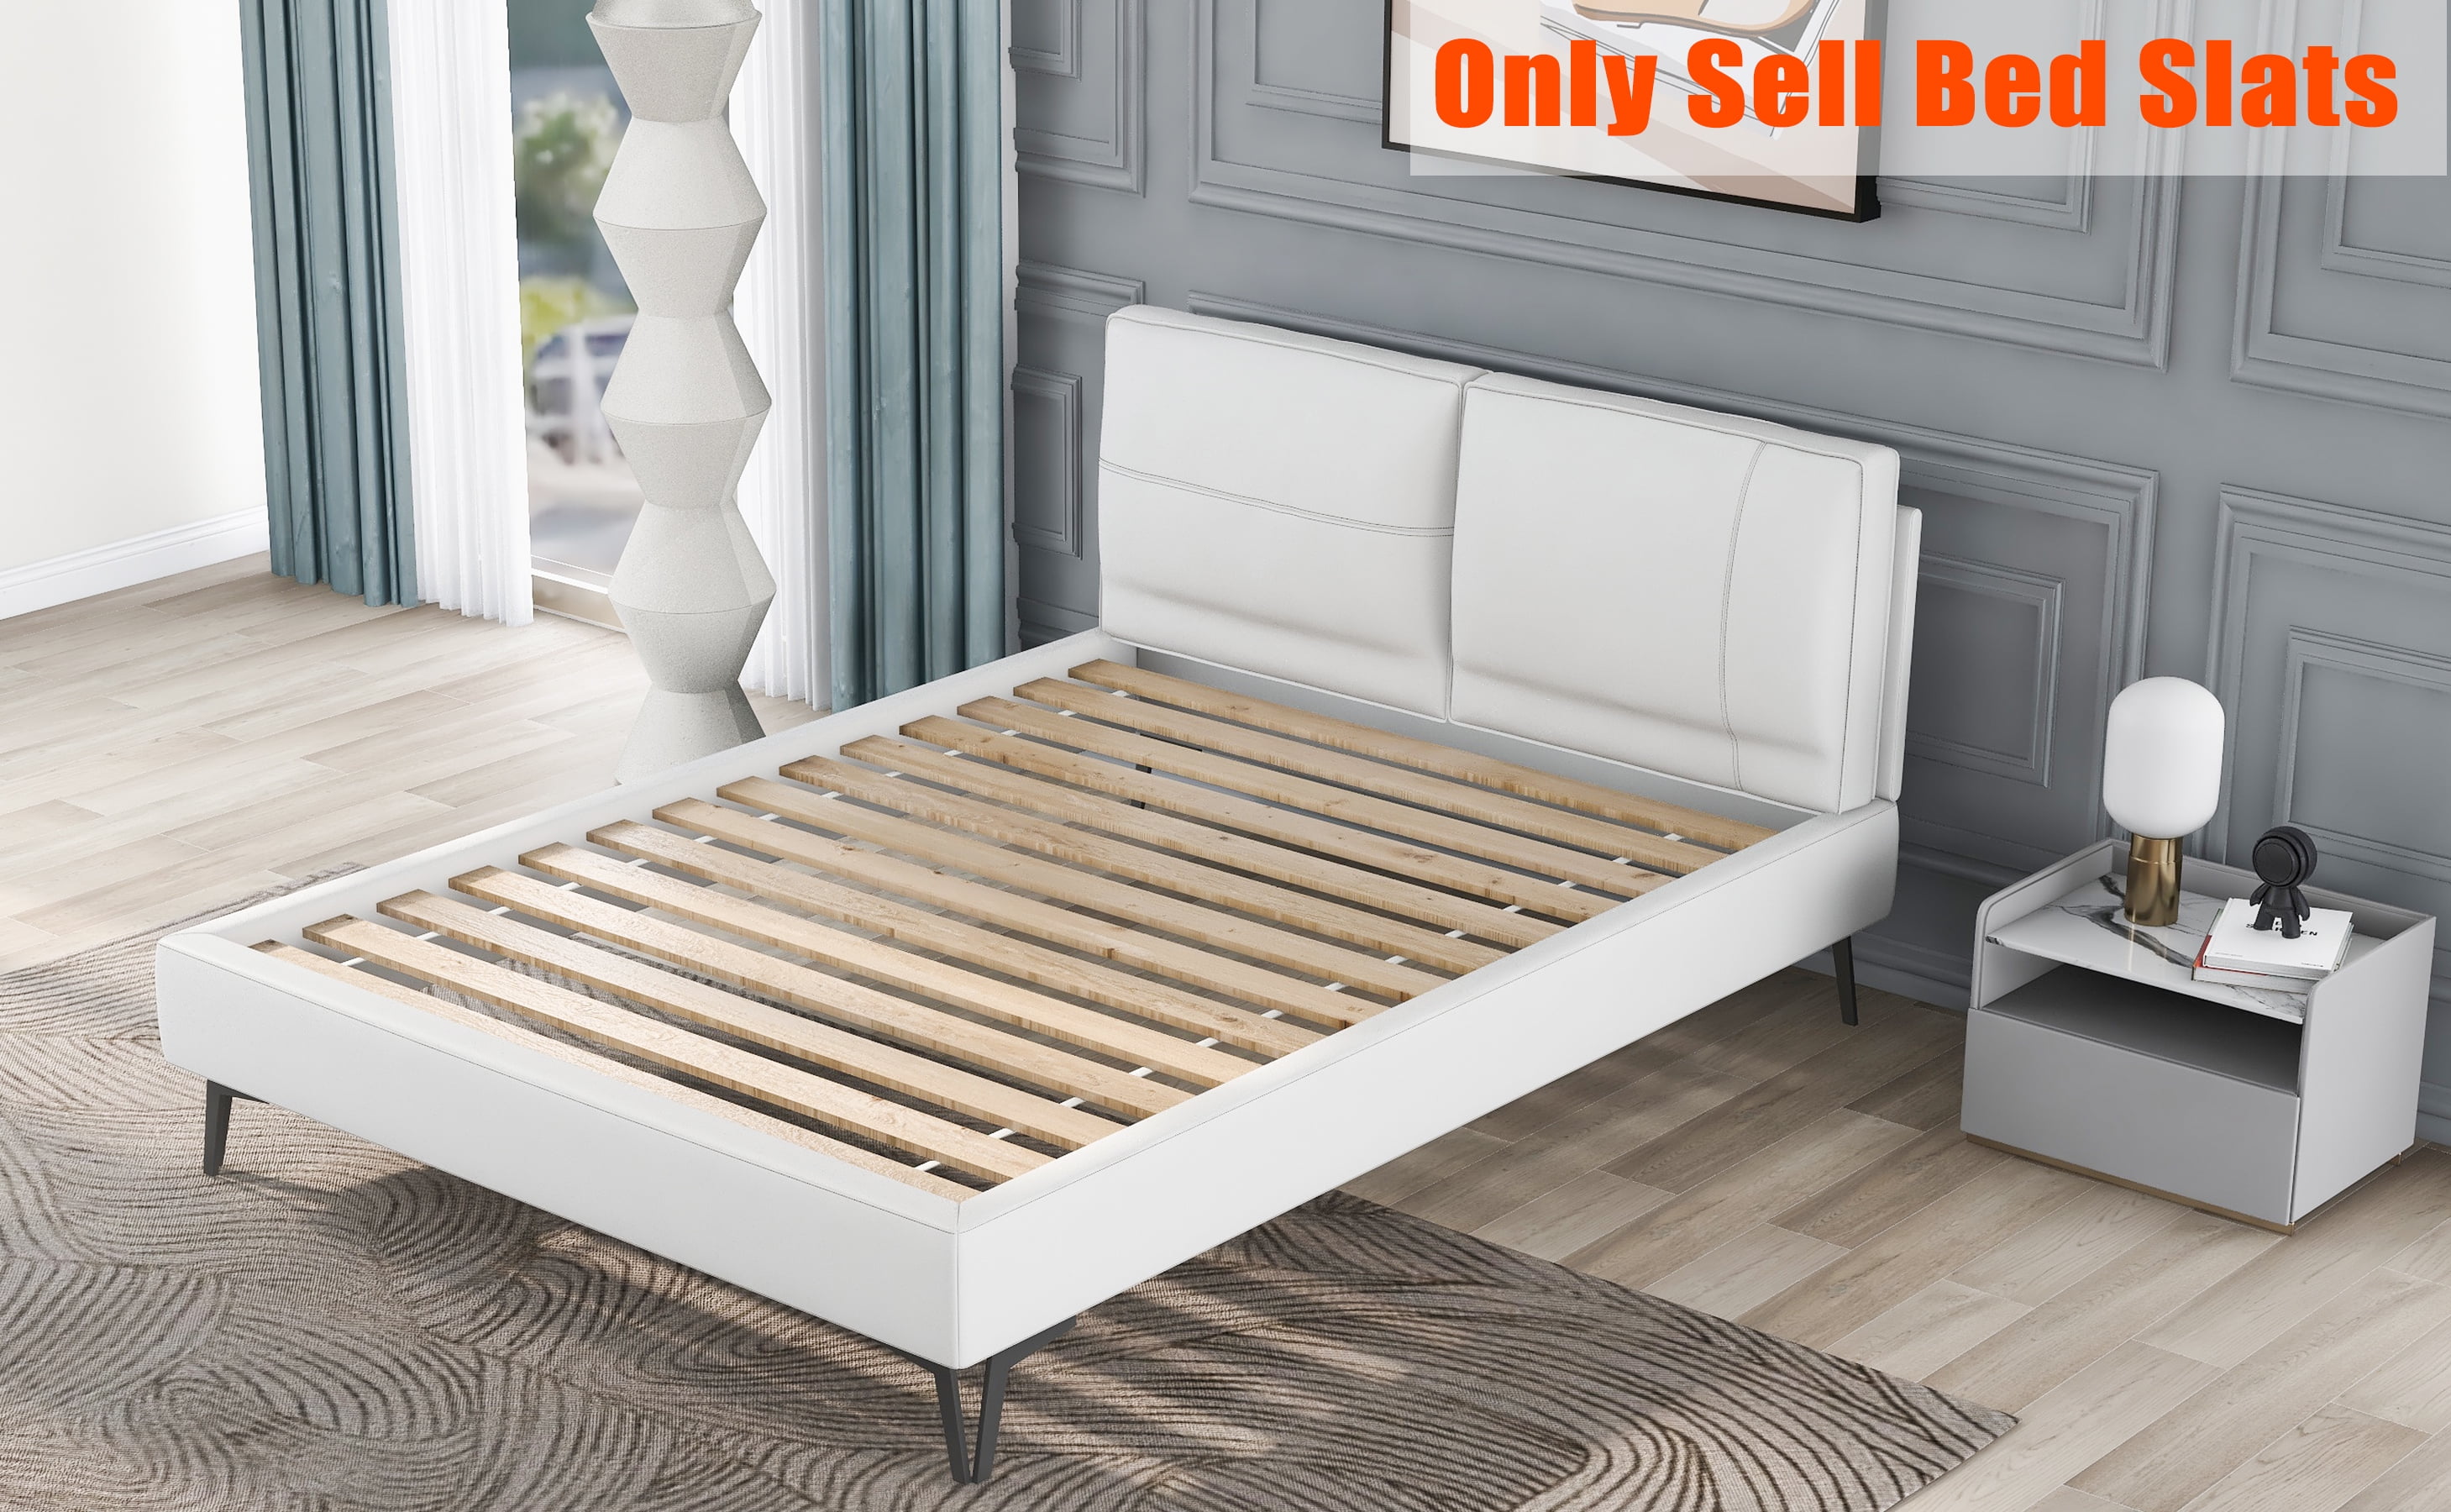 Network slatted bed with straps Brace All Sizes 